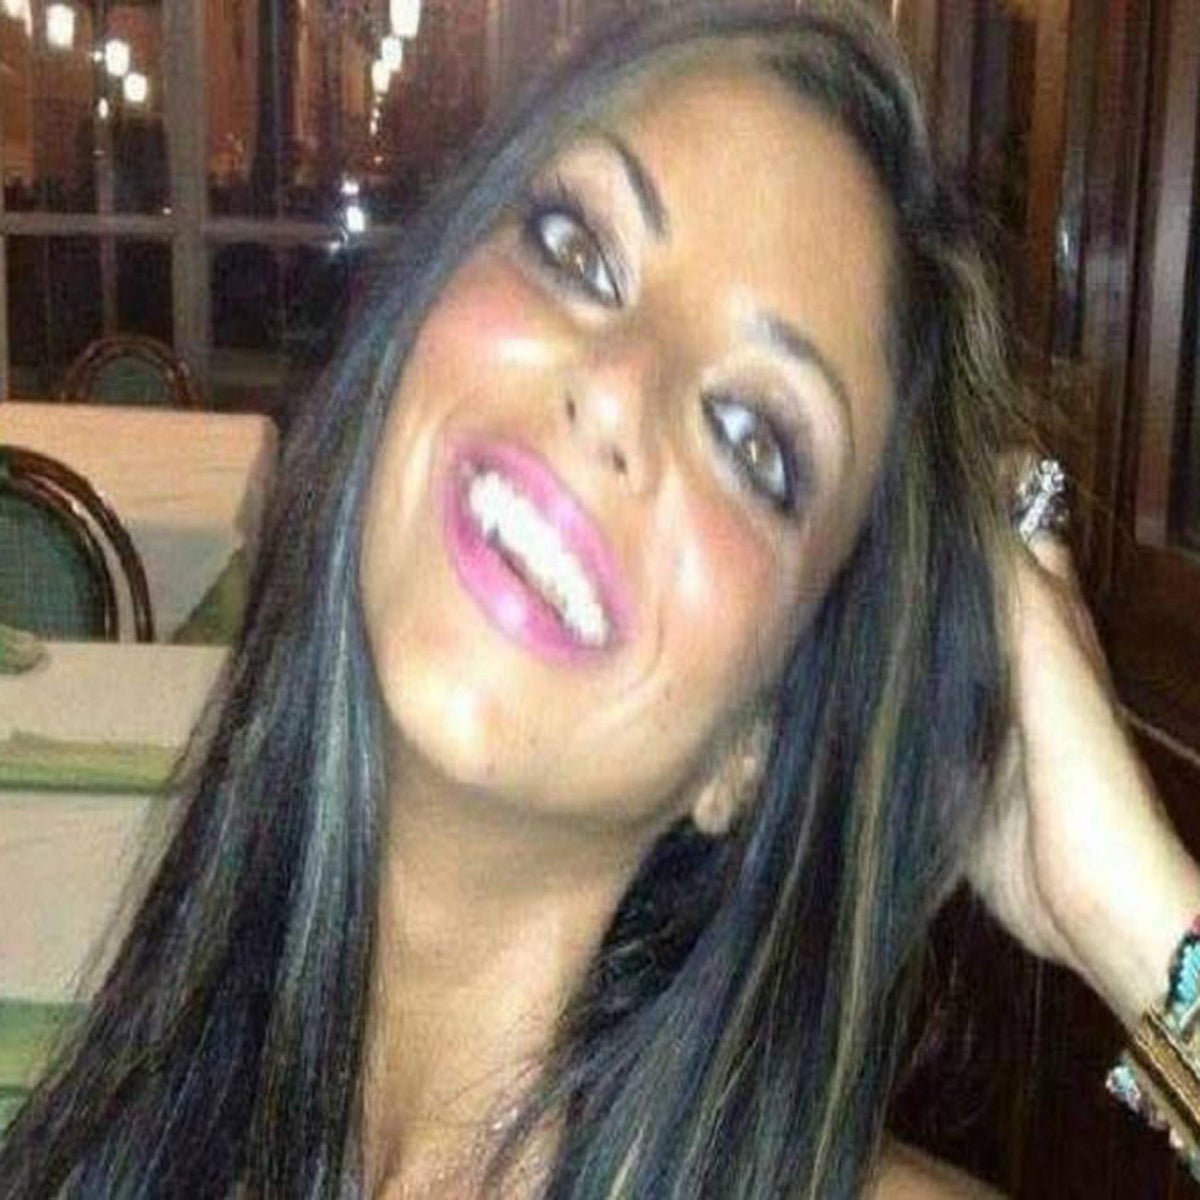 Italian Porn Woman Revenge - Investigation launched into death of Italian woman who killed herself after  explicit images went viral | The Independent | The Independent